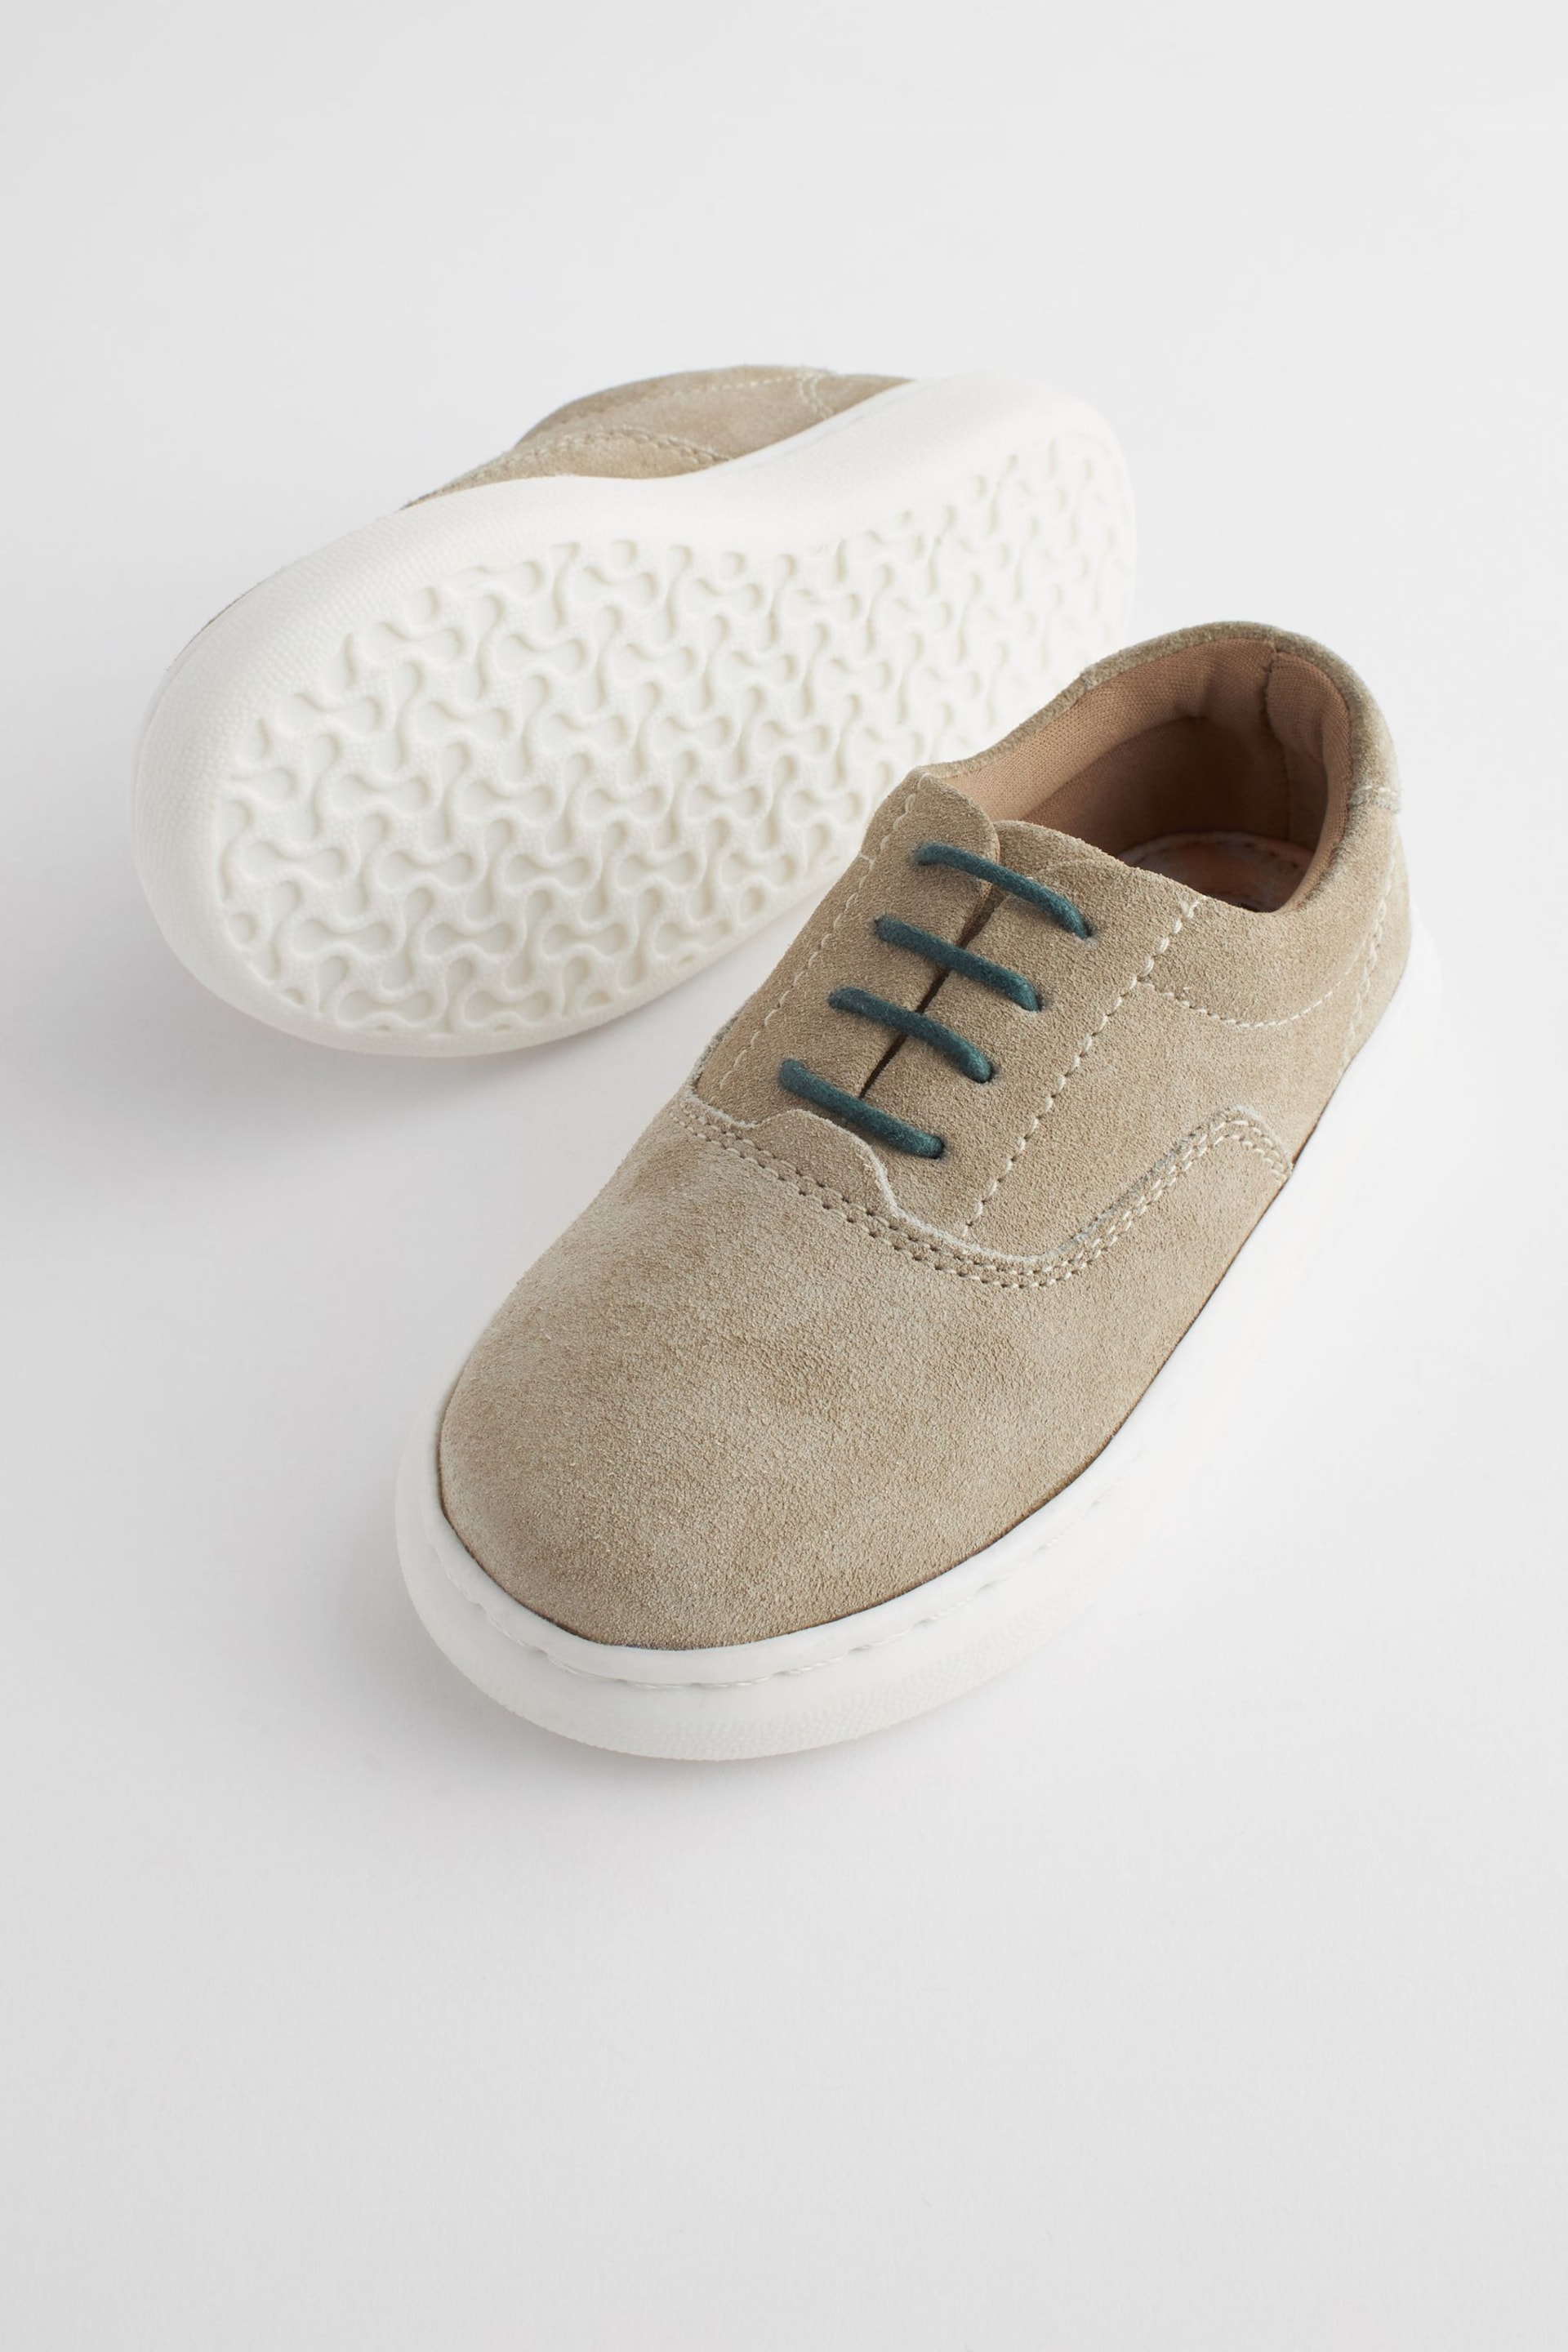 Neutral Stone Smart Leather Lace-Up Shoes - Image 4 of 8